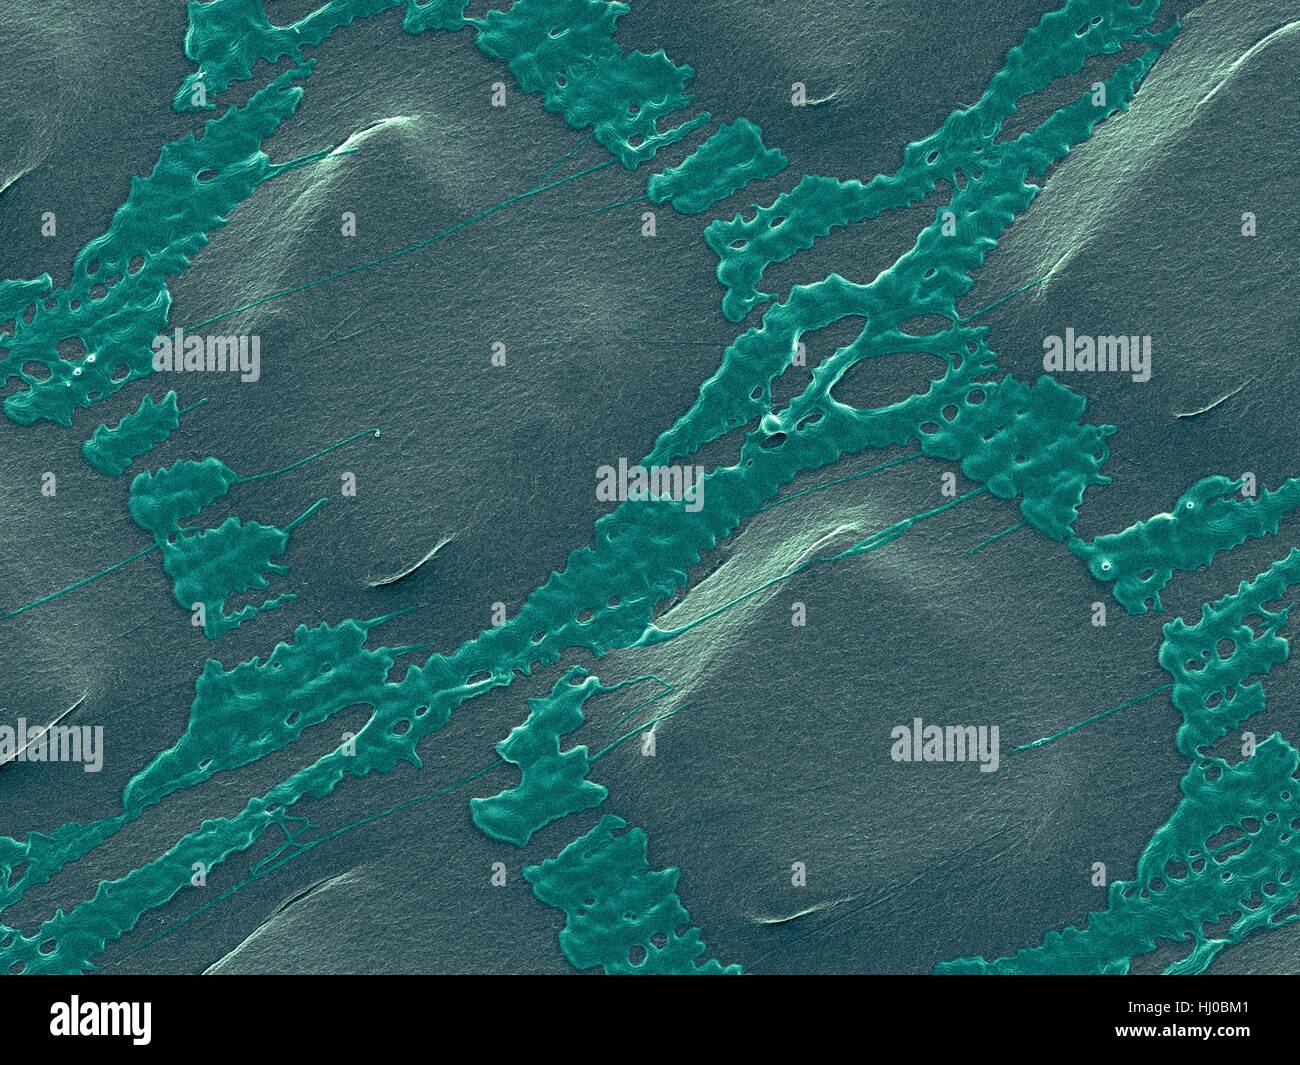 Coloured scanning electron micrograph (SEM) of Plastic wrap,Glad Press'n Seal.Plastic wrap is thin plastic film (less than 0.01mm in thickness) that typically is used for sealing food items in containers to keep them fresh.Glad Press'n Seal wrap is special type of plastic wrap that has its surface Stock Photo